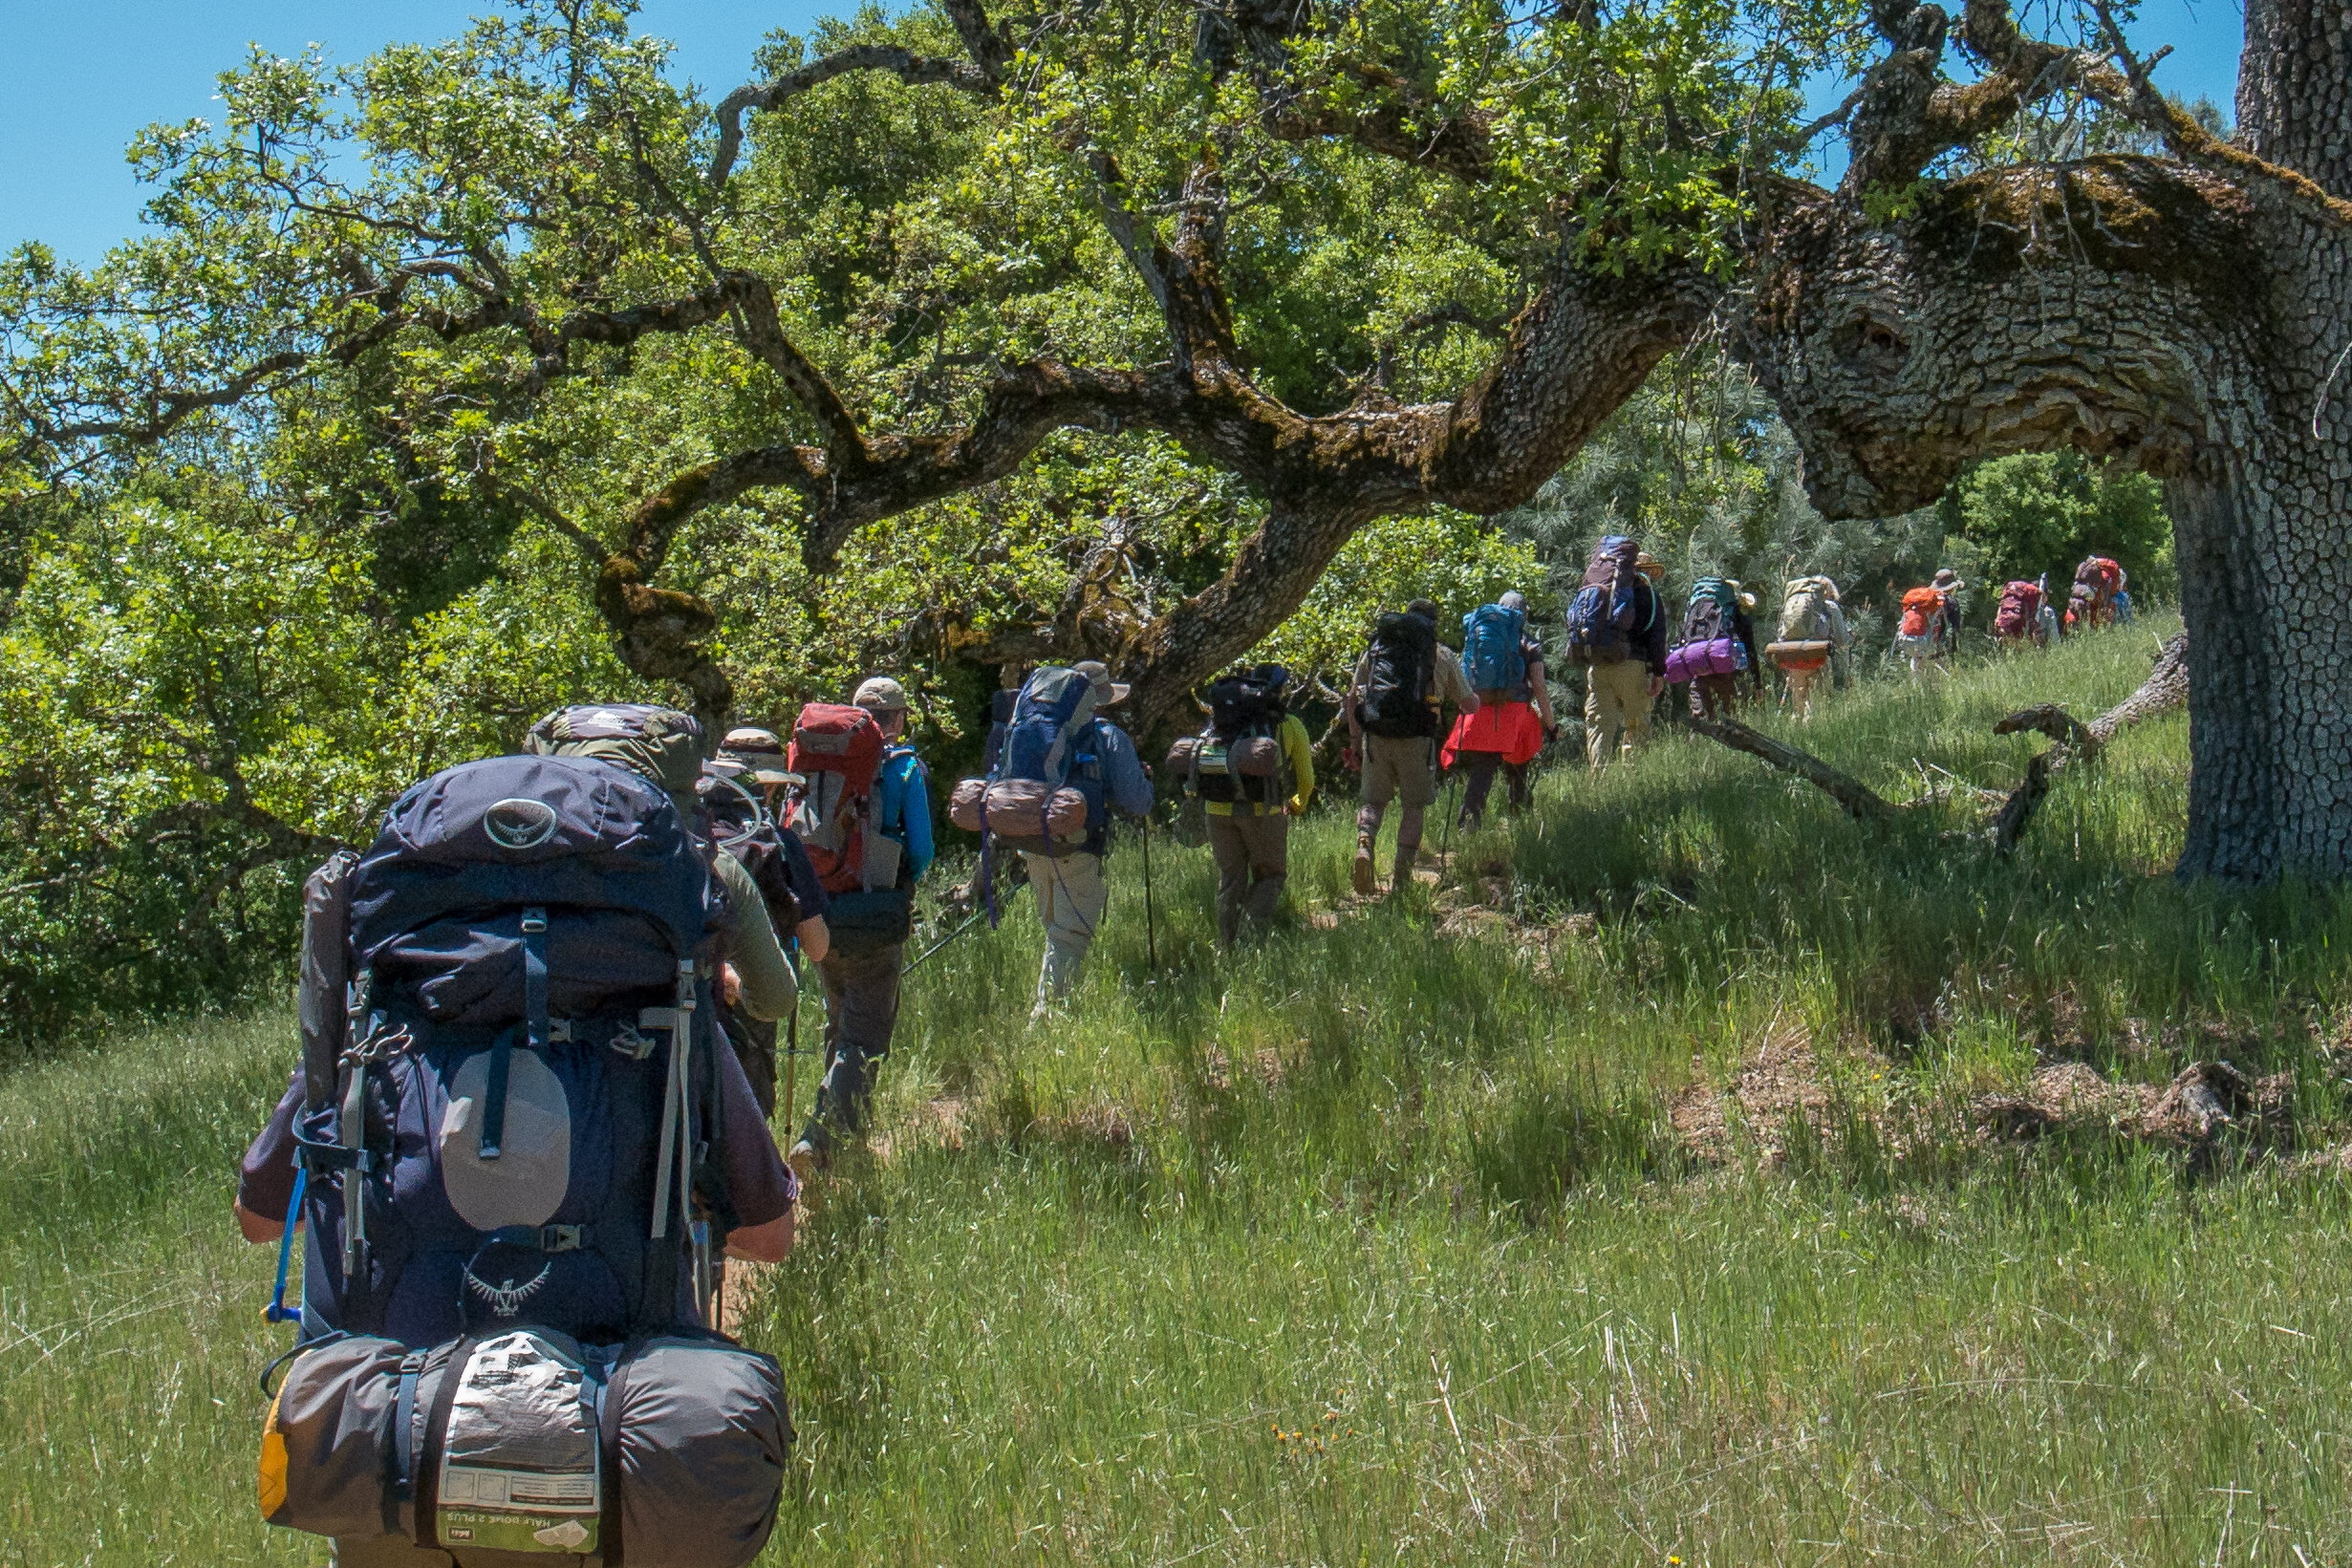 A group of backpackers hiking through the wilderness